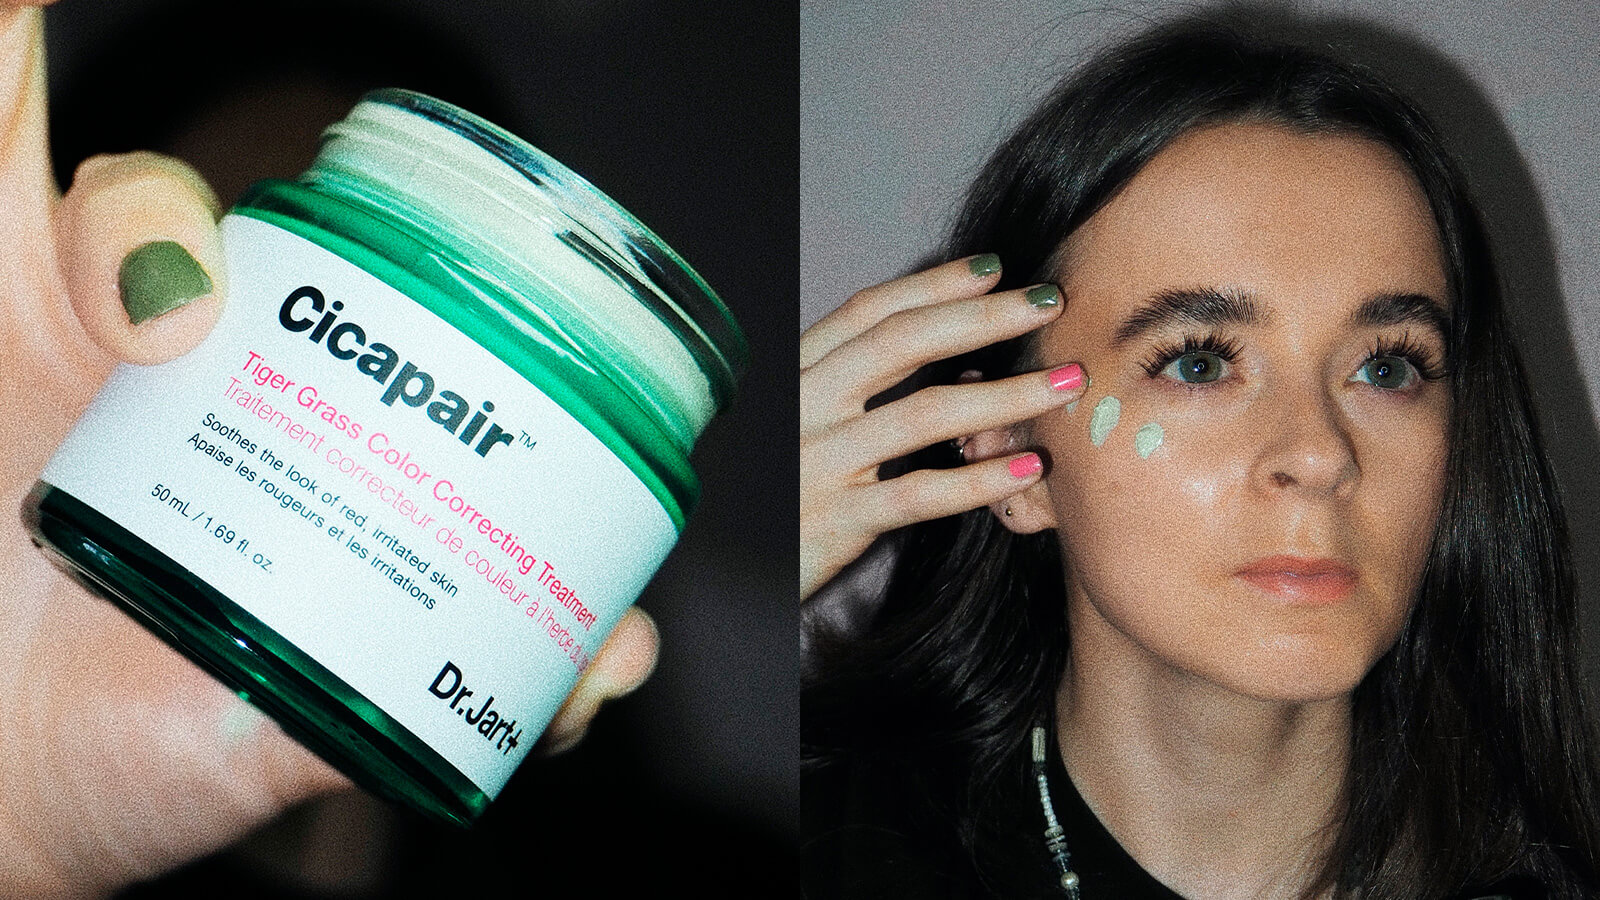 TikTok Made Buy It: Dr Jart+ Cicapair Tiger Grass Colour Correcting Treatment Beauty Bay Edited